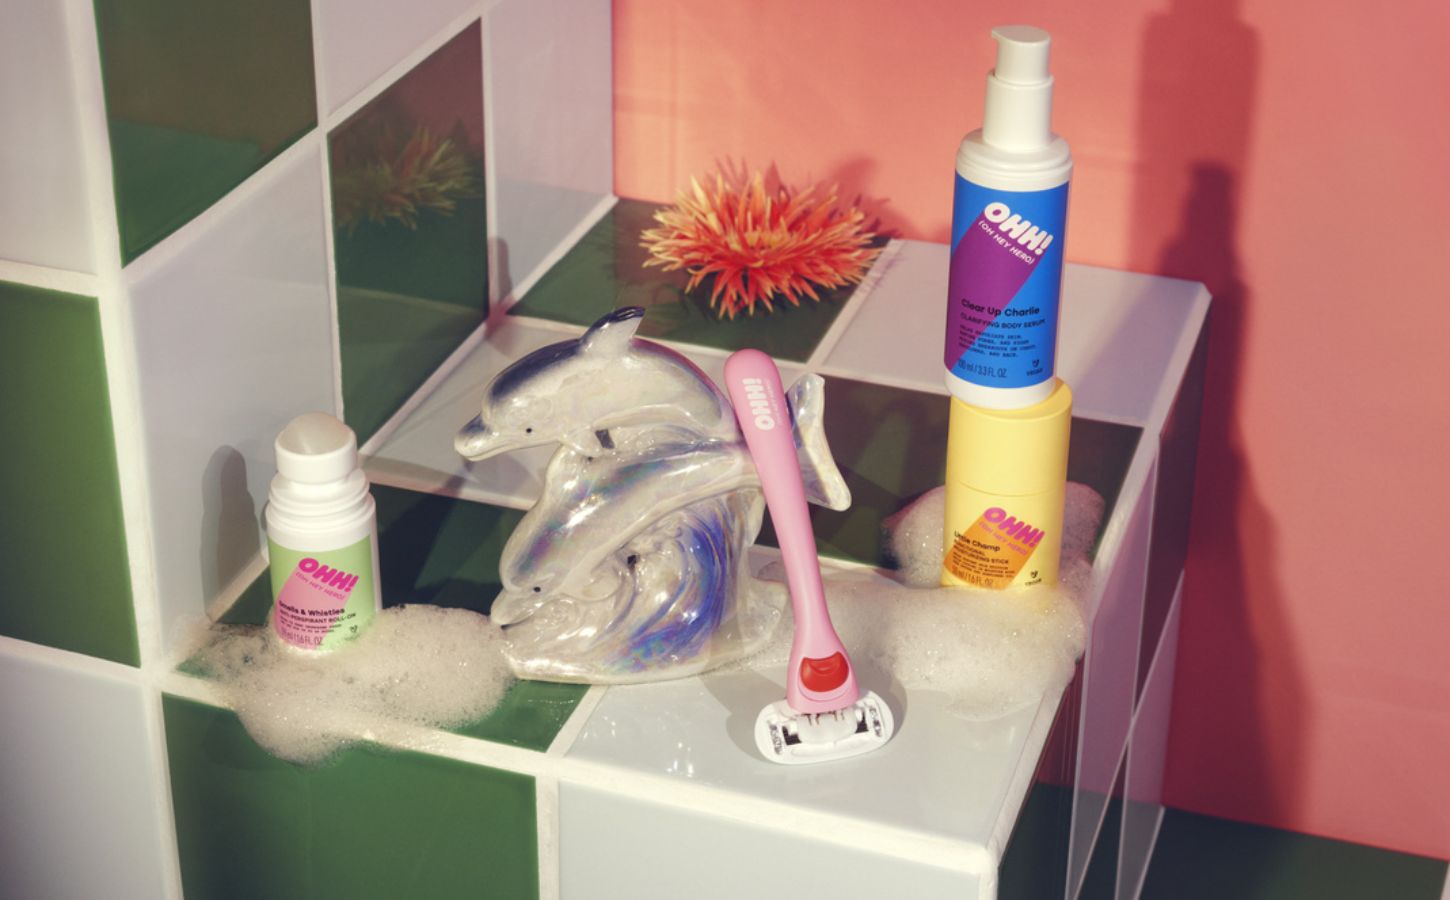 The new OOH! vegan beauty line from H&M shown in a bathroom setting with kitsch accessories